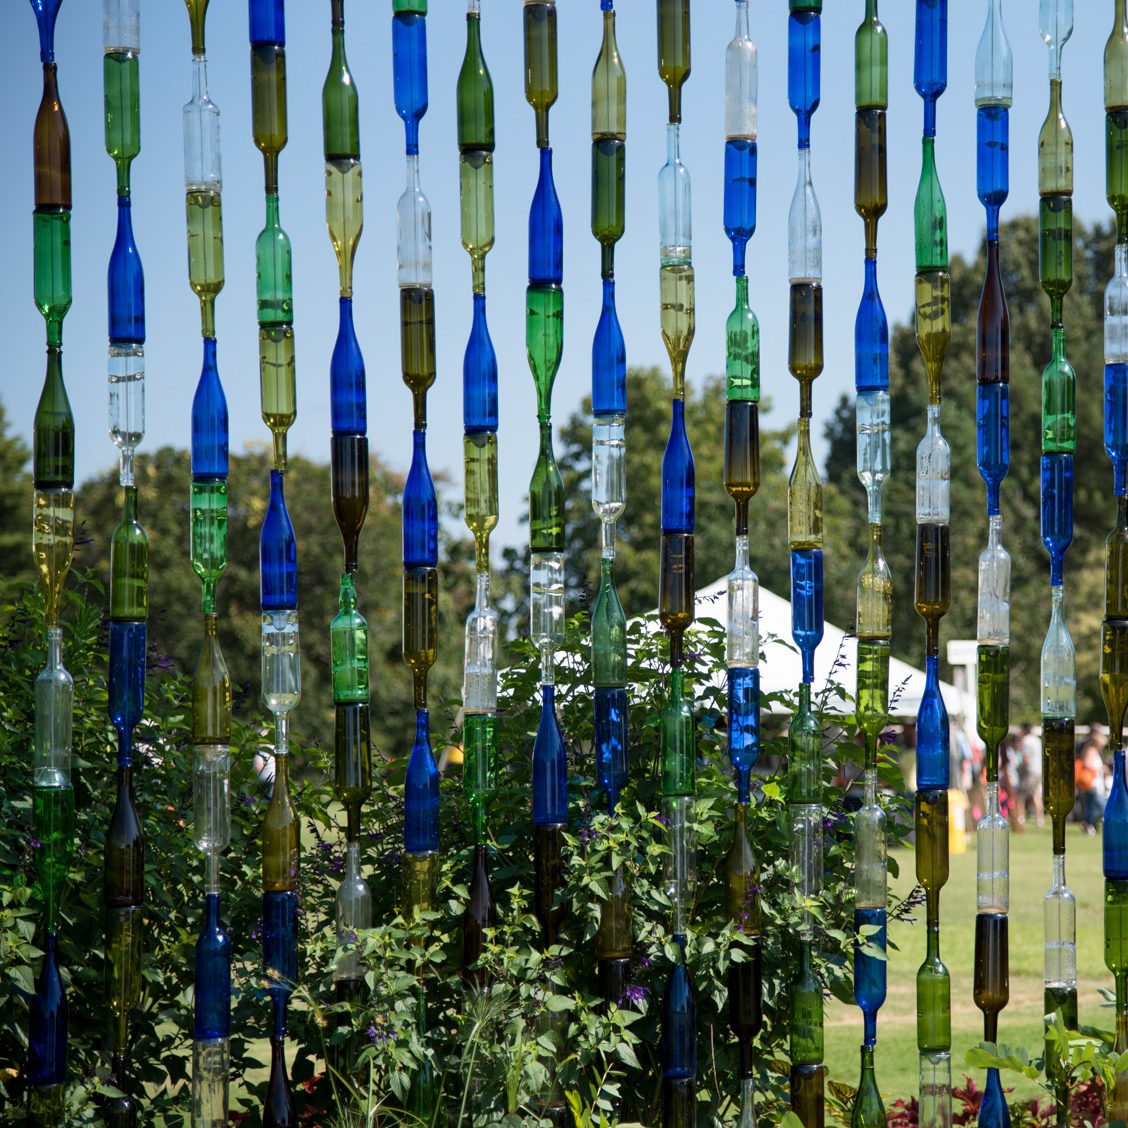 Colored Glass Bottle Wall at the UT Gardens in Jackson 